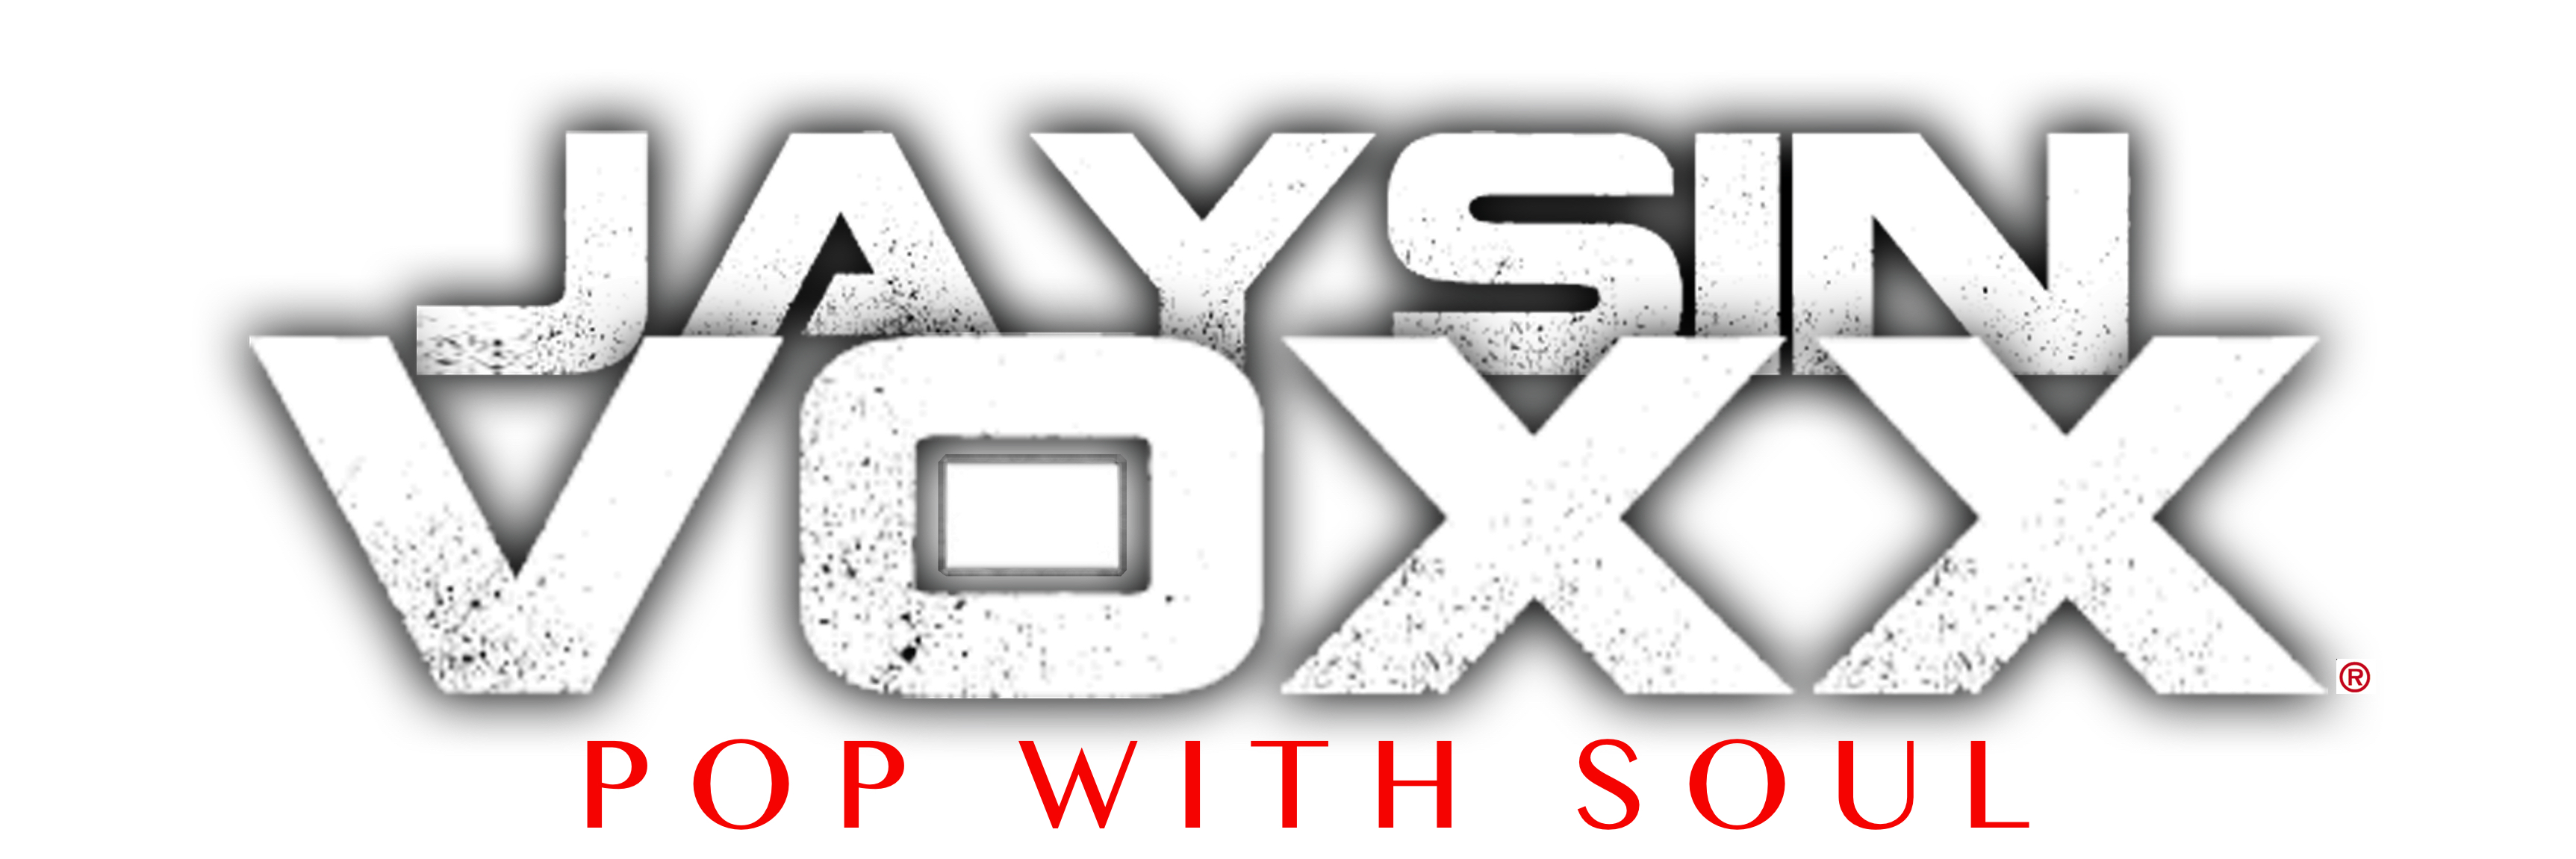 “A Better World” is now available on iTunes,  CD Baby and Amazon. Check out Jaysin Voxx at www.jaysinvoxx.com.